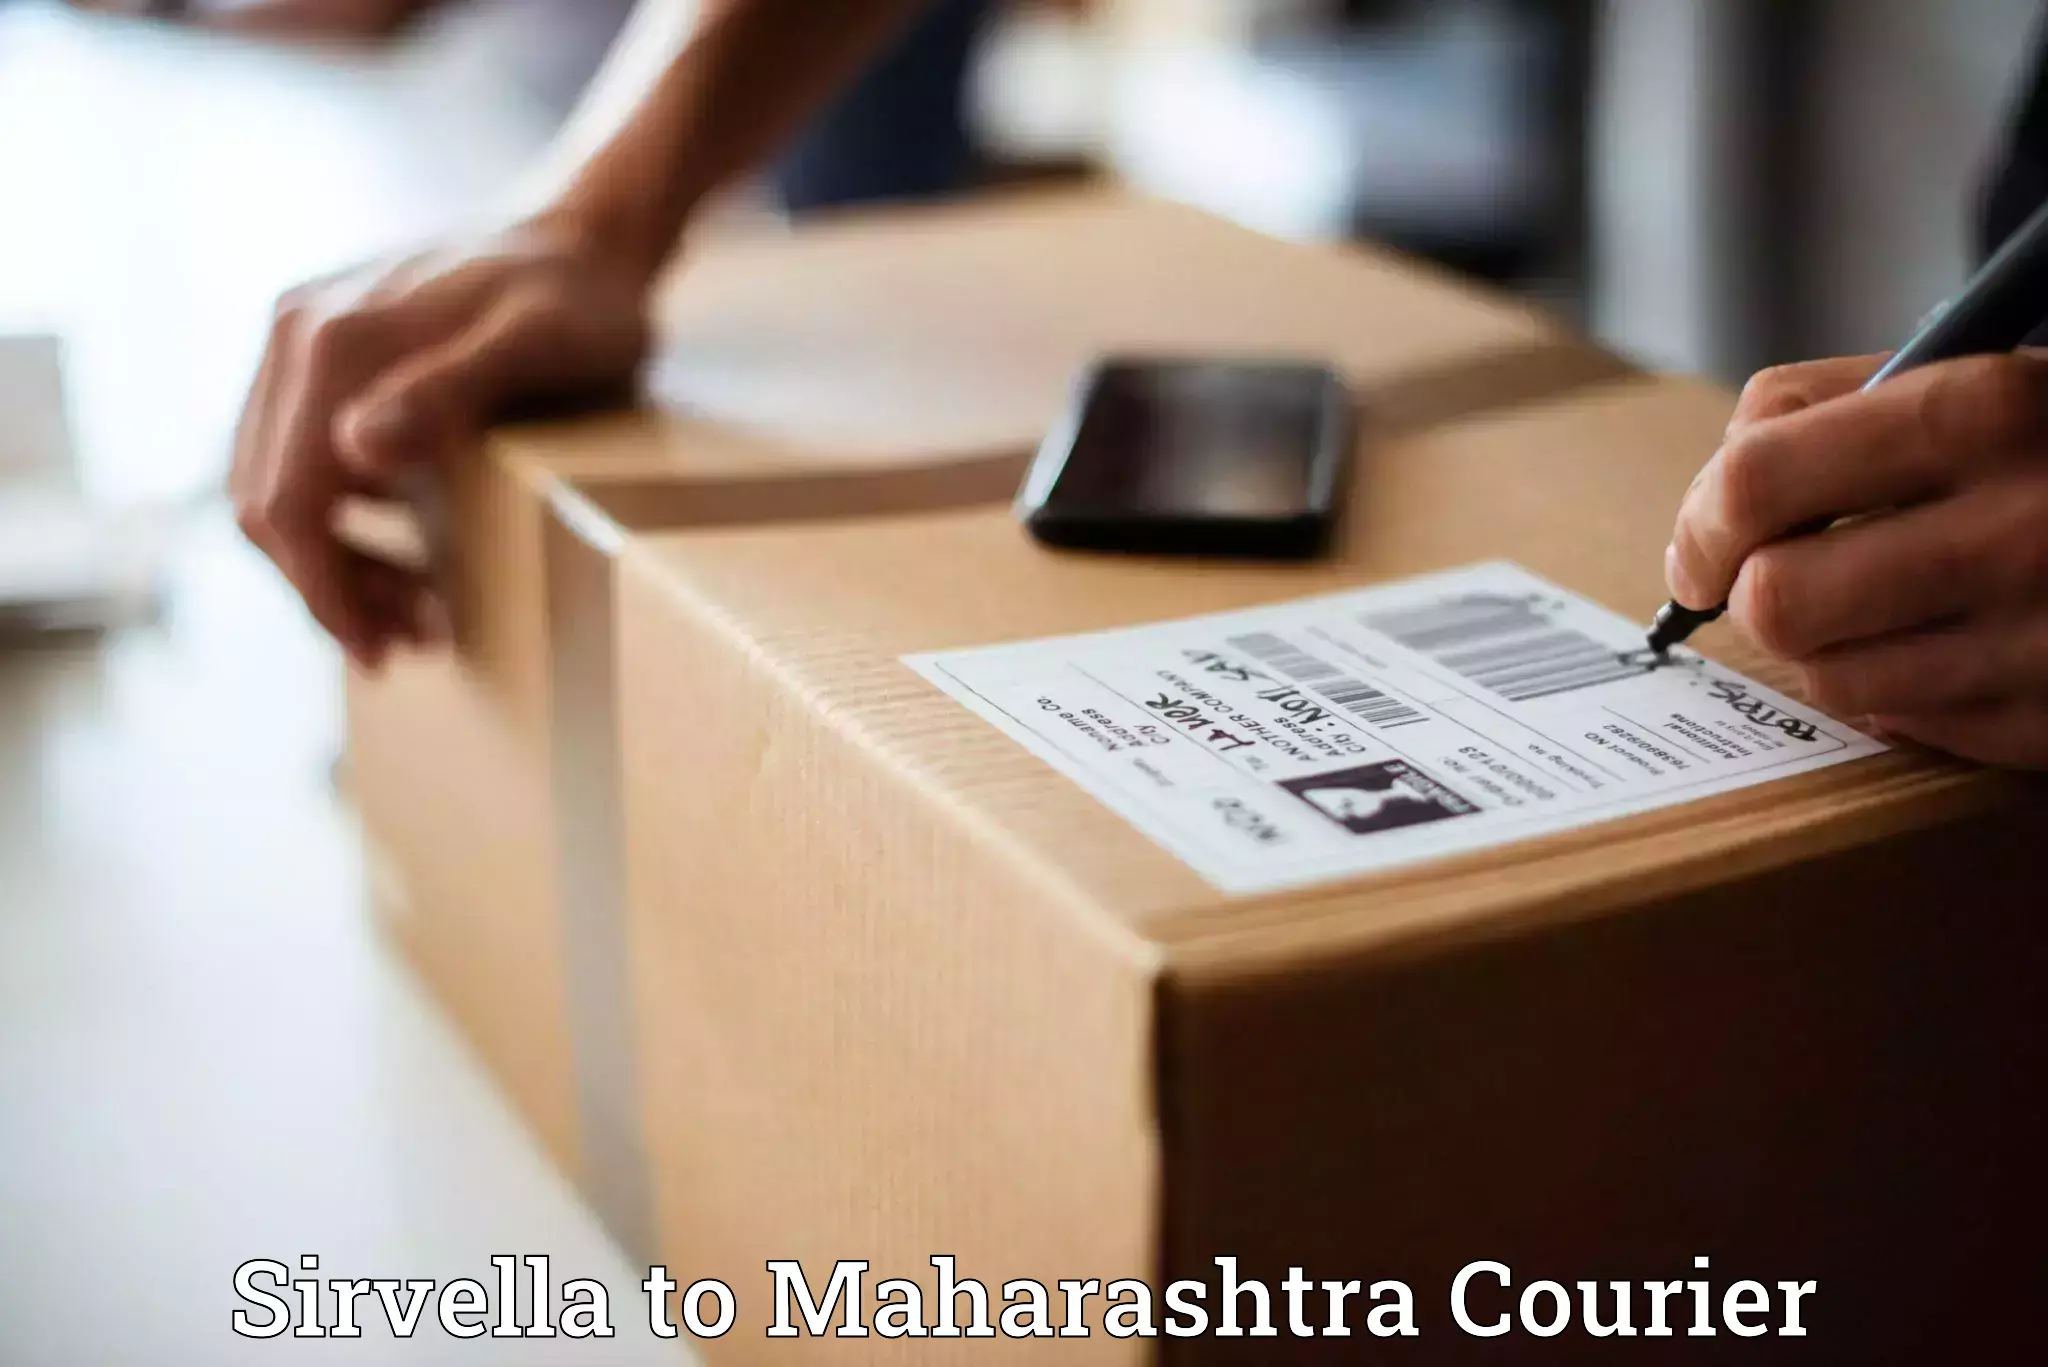 State-of-the-art courier technology Sirvella to Thane